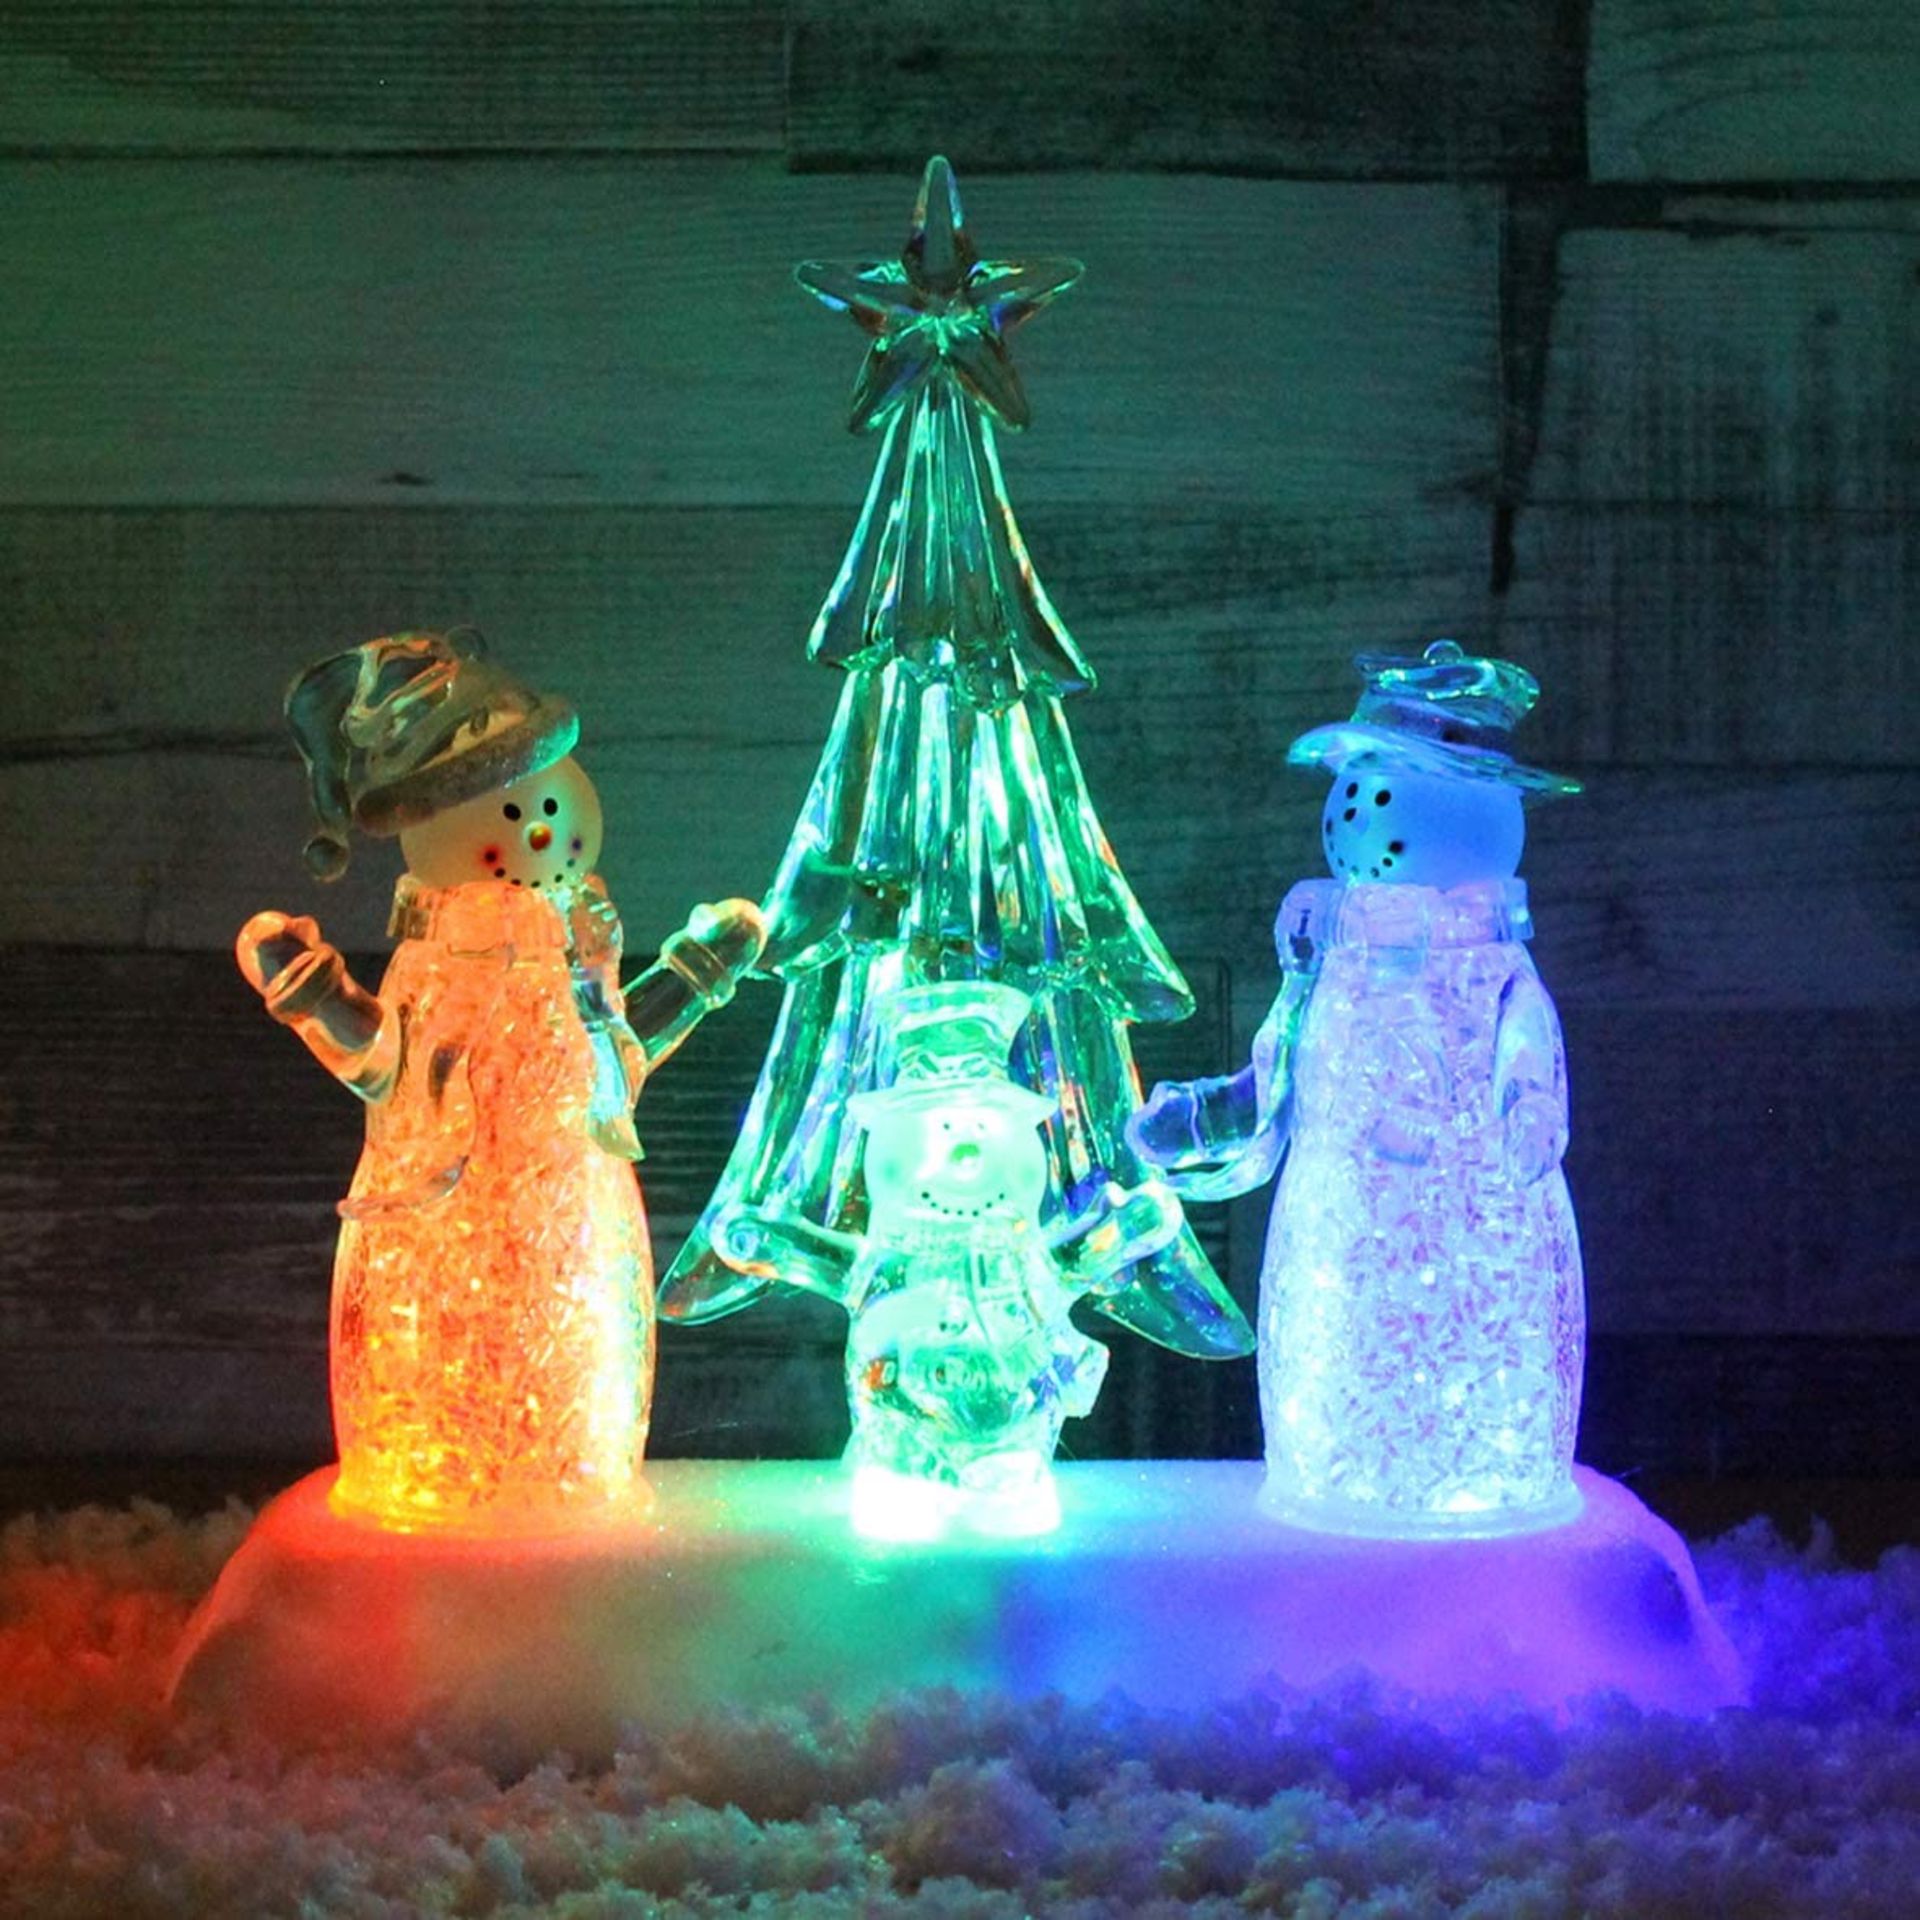 Christmas Workshop Acrylic Snowman Family Scene, Colour Changing LED Lights, Indoor - Image 3 of 3